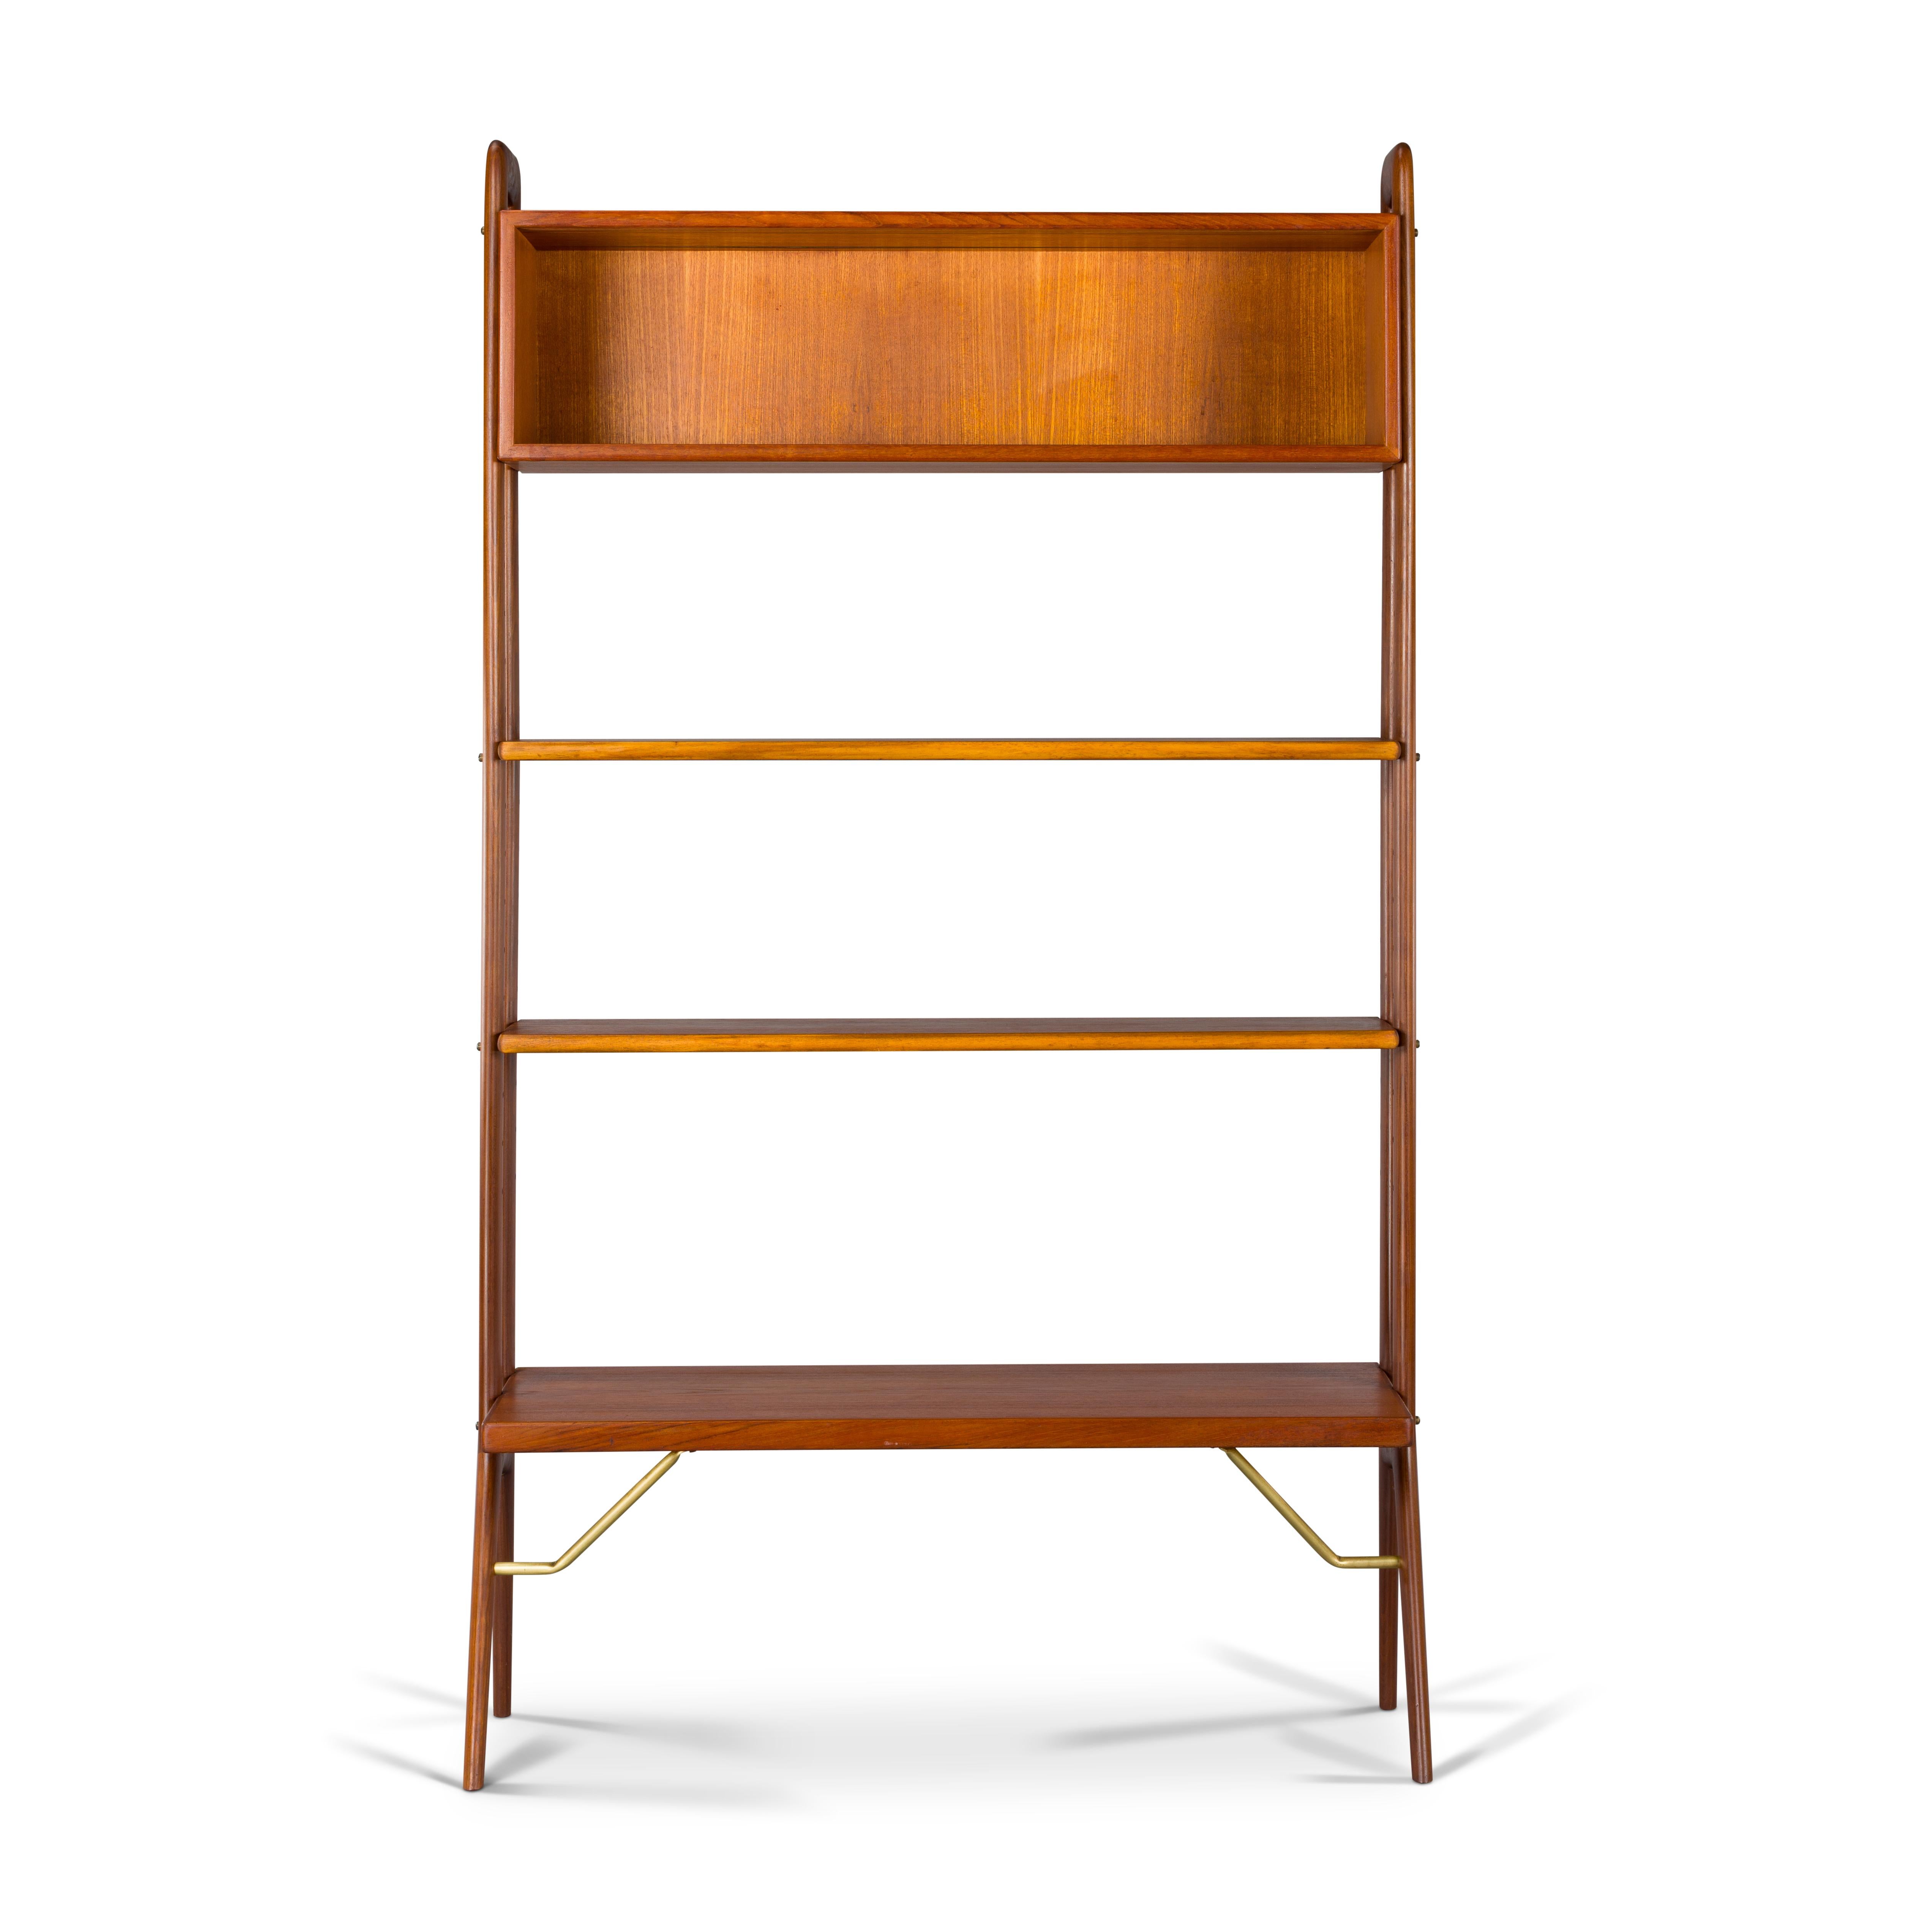 This Danish Mid-Century Modern freestanding room divider or bookshelf is a top -quality unit. Design by Kurt Ostervig. This chest features two height adjustable shelves, one big shelf supported by brass rods. The upper cabinet can be featured by